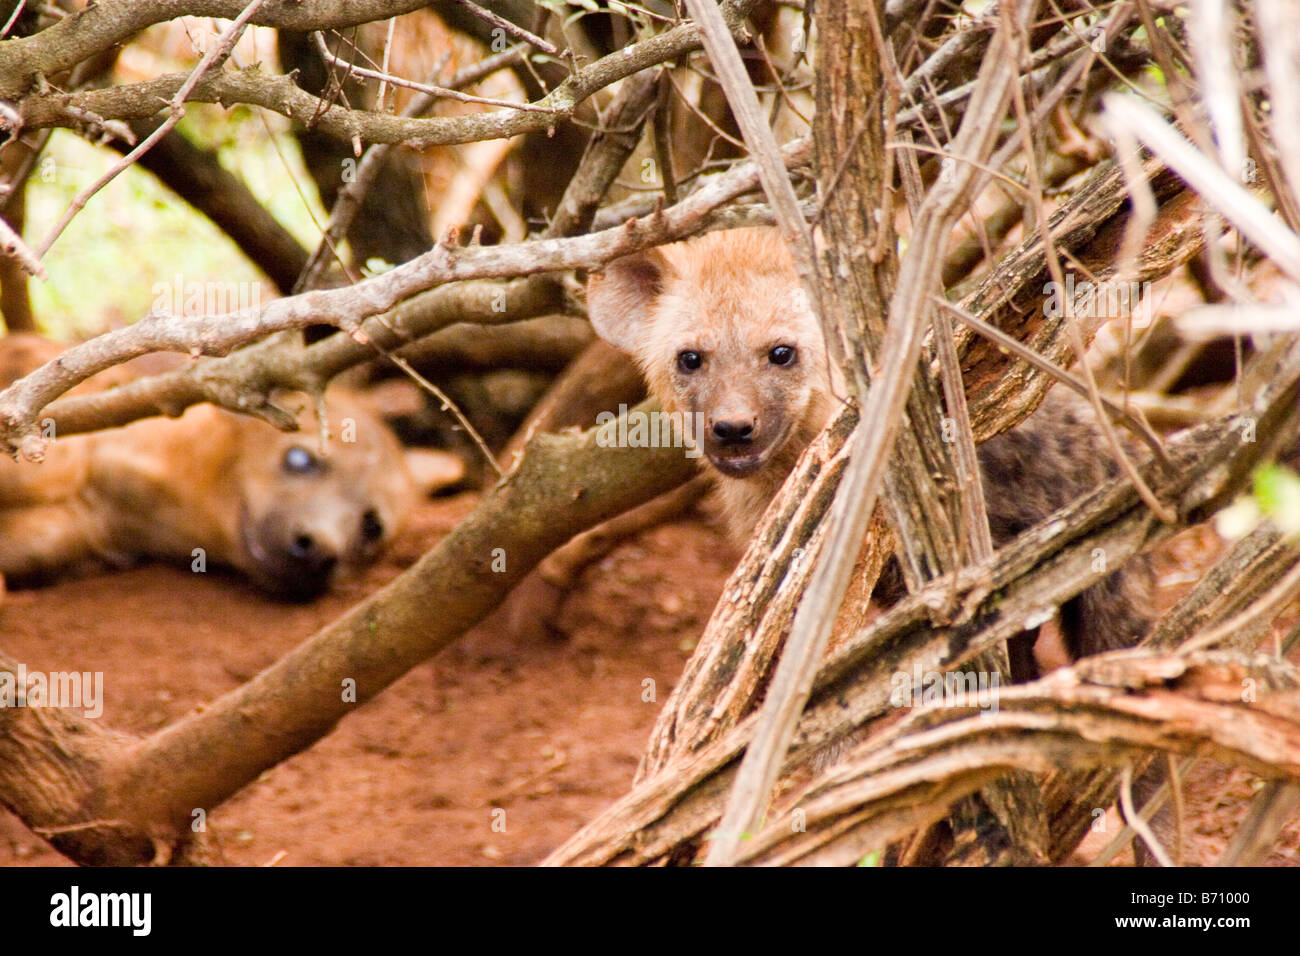 A baby hyena in South Africa's Hluhluwe Imfolozi parks in KwaZulu-Natal being lazily watched by his mother. Stock Photo